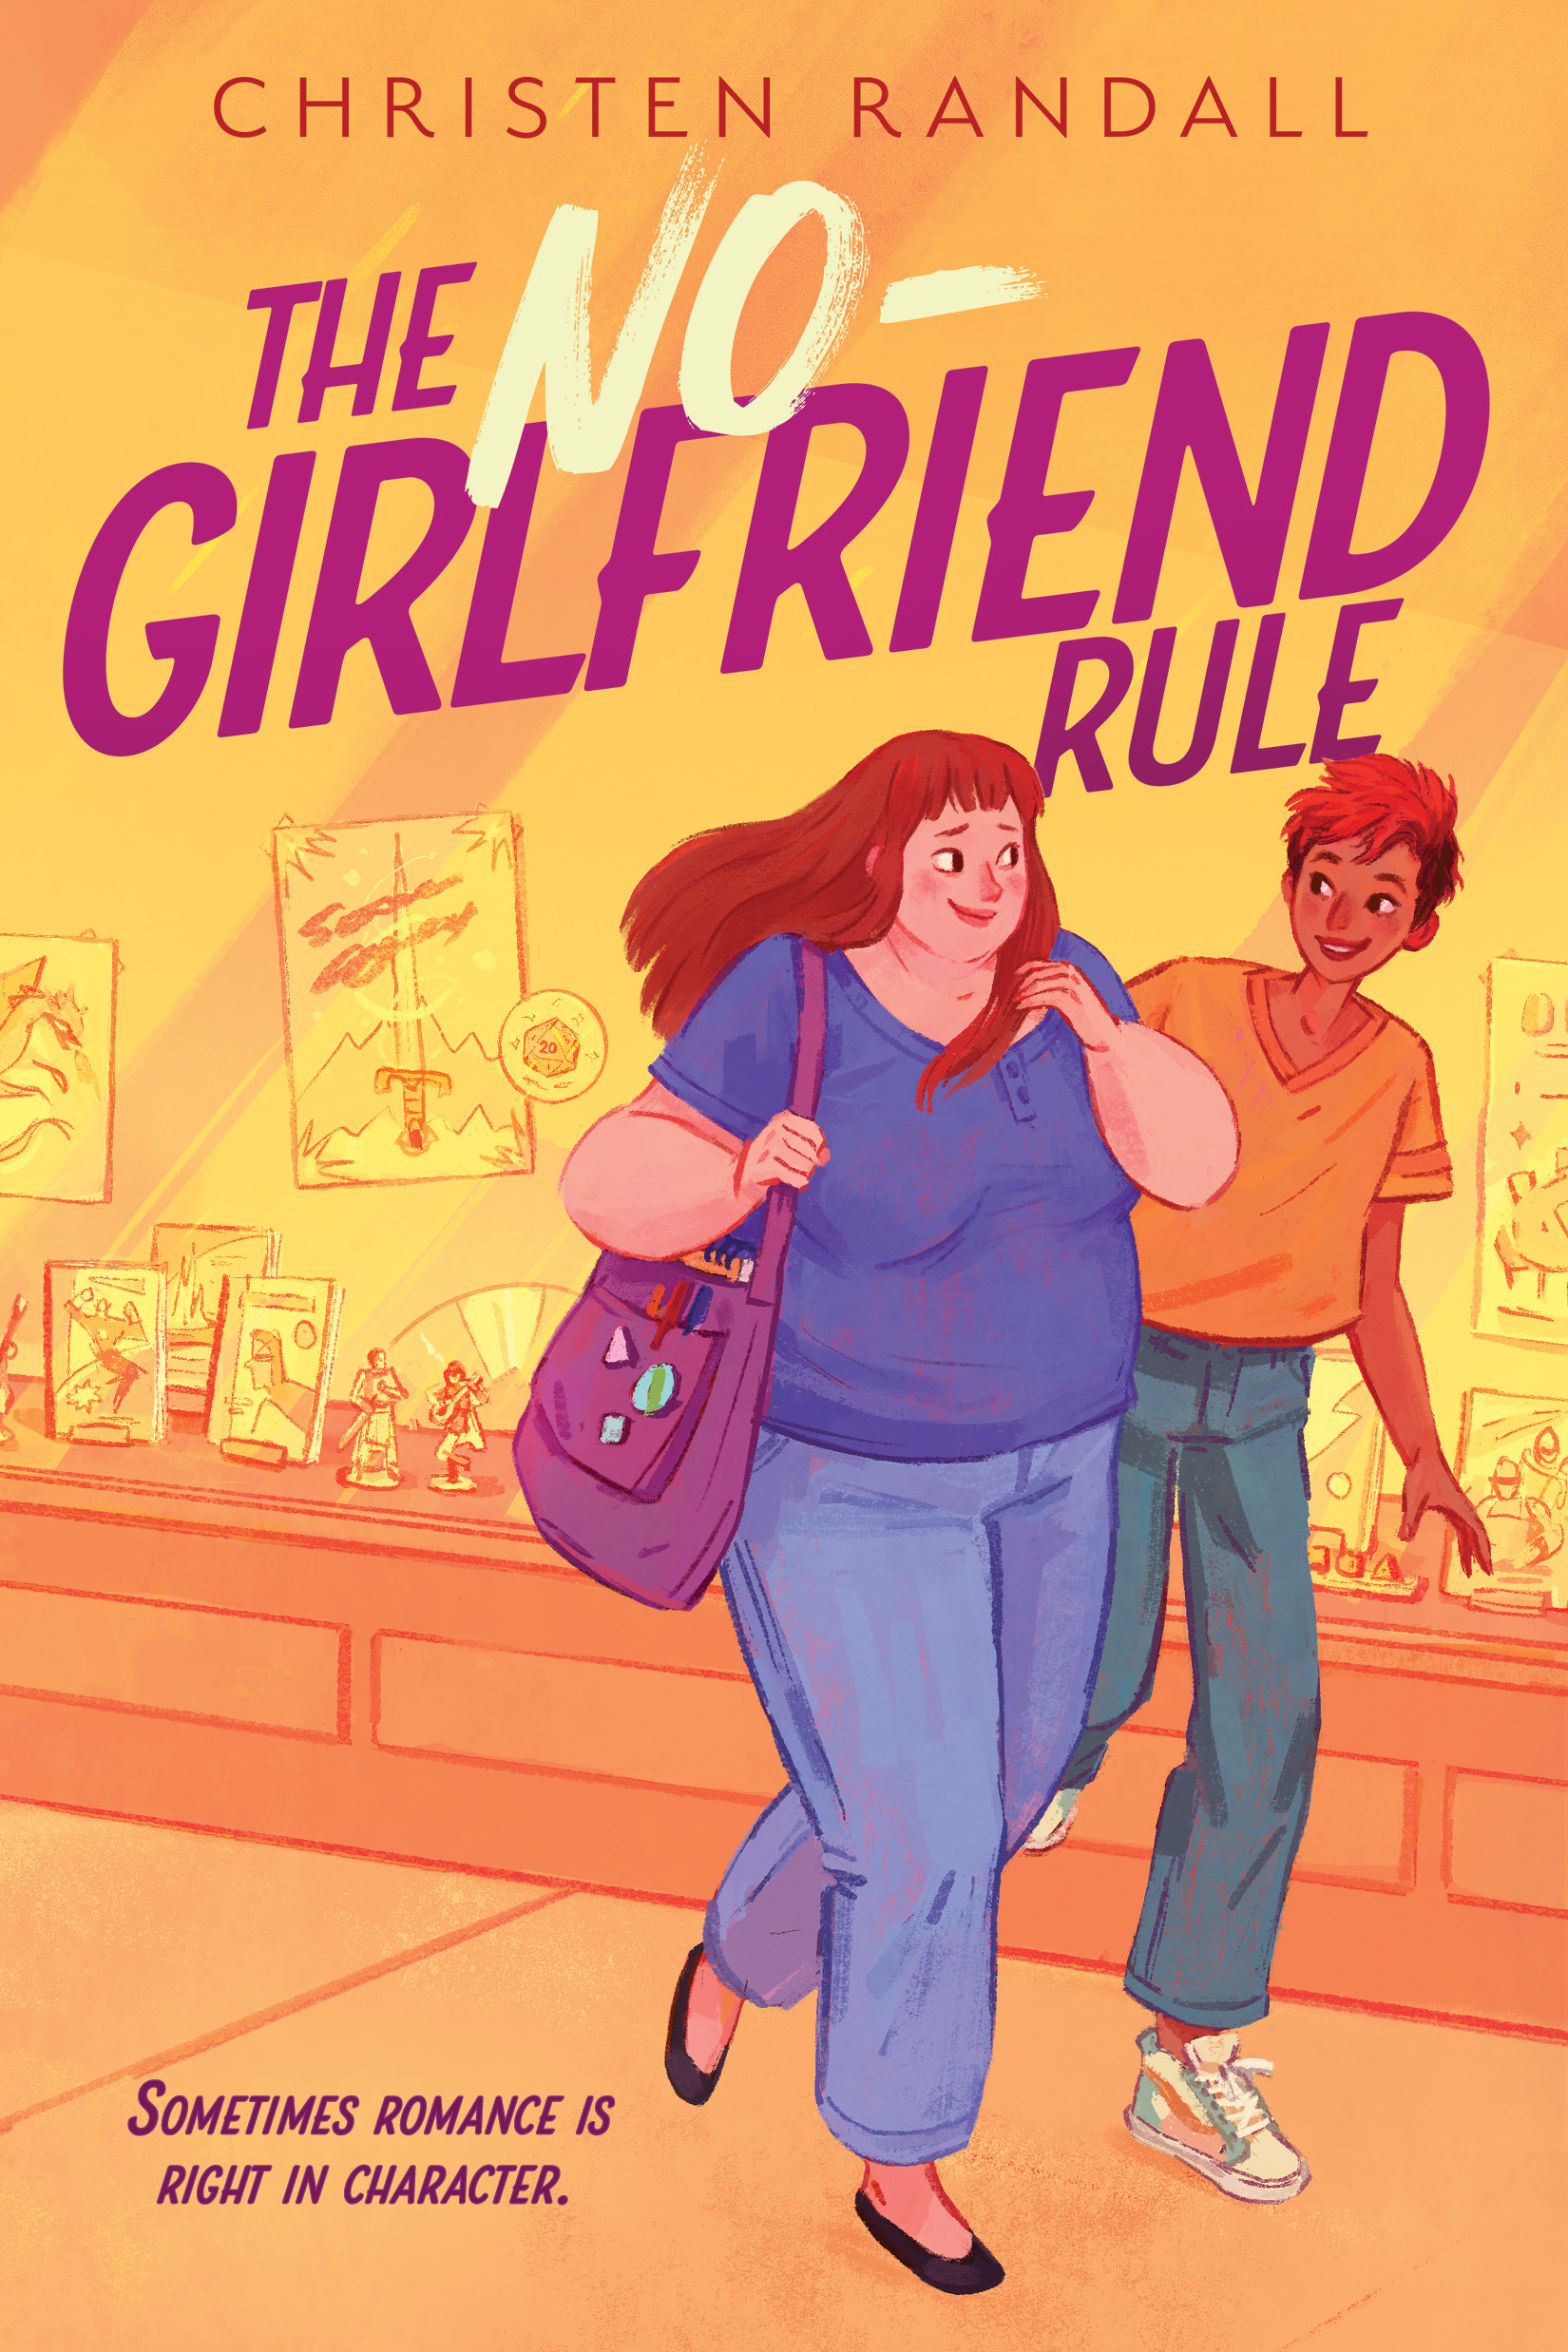 A young adult novel cover depicting a fat white girl with brown hair and a purple tote bag (with pins outside and a sketchbook visible inside) smiling tentatively at a thin brown girl with dyed orange hair next to her; they are walking on the sidewalk on the right side of the cover. Behind them on the left a store window is visible, and it contains miniature RPG figures (notably a paladin and a bard) as well as posters and comic books. The tagline reads "Sometimes romance is right in character."